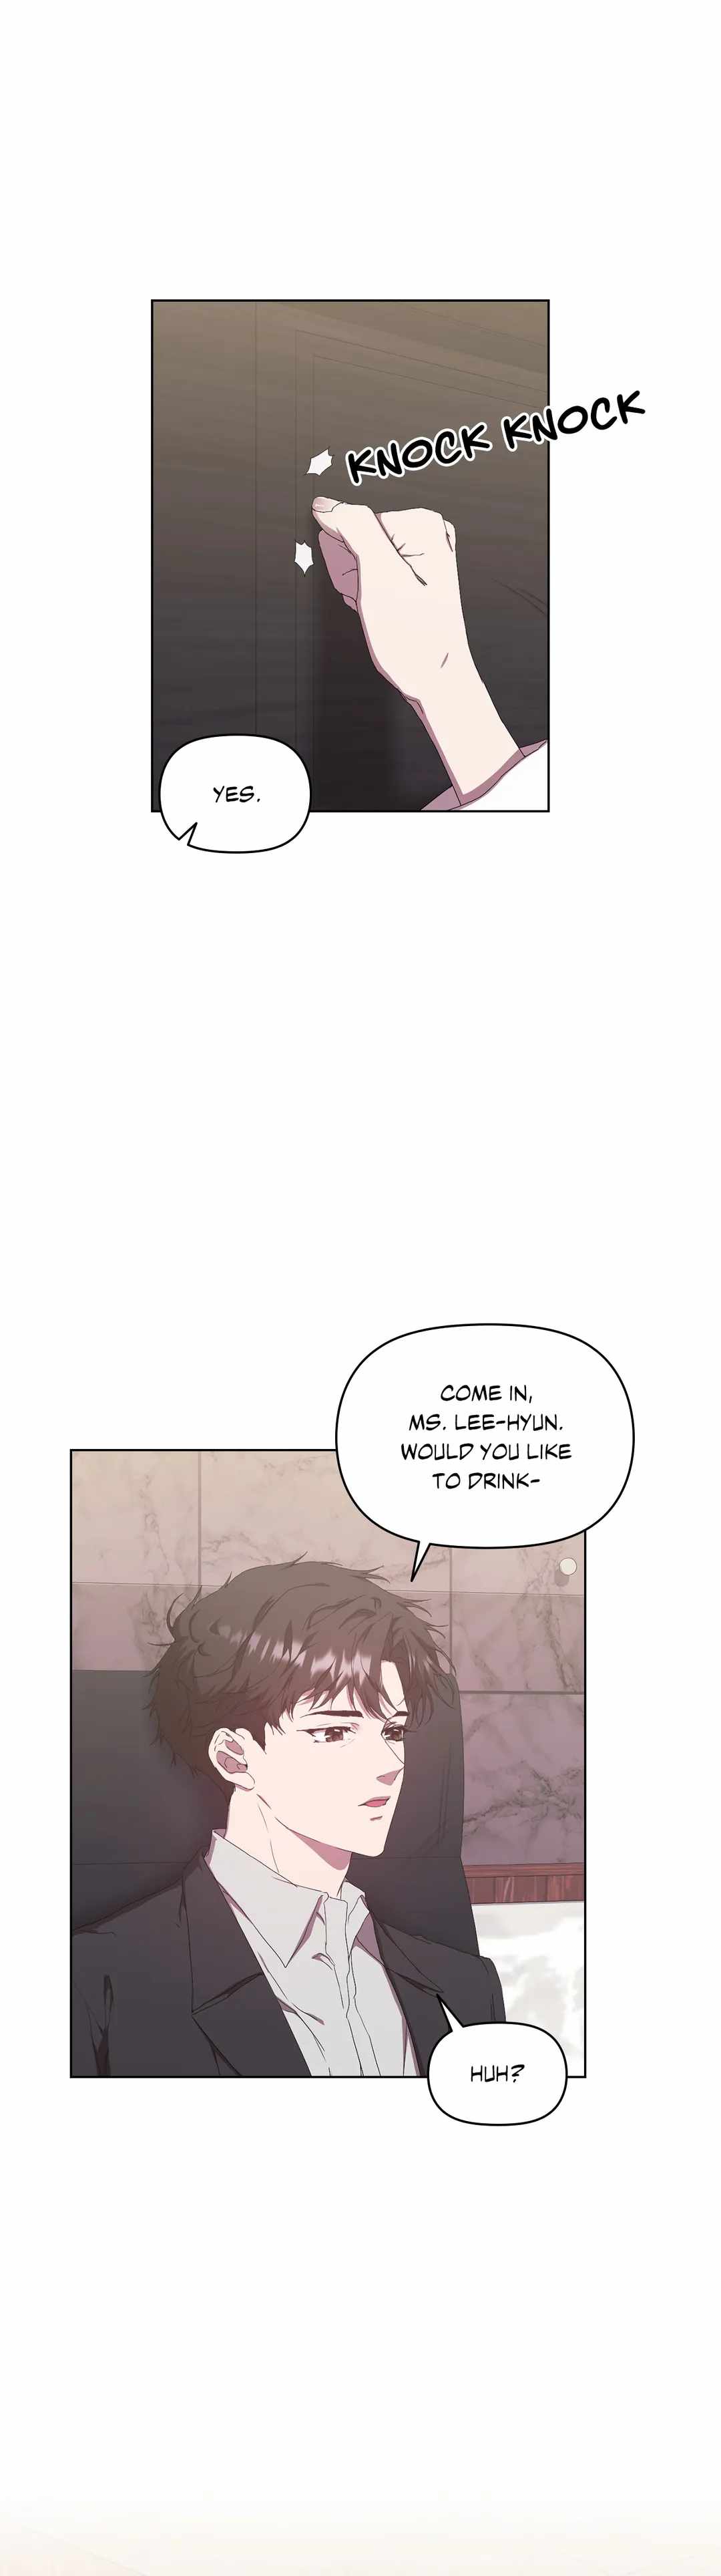 Because It’s Love Chapter 49-eng-li - Page 1